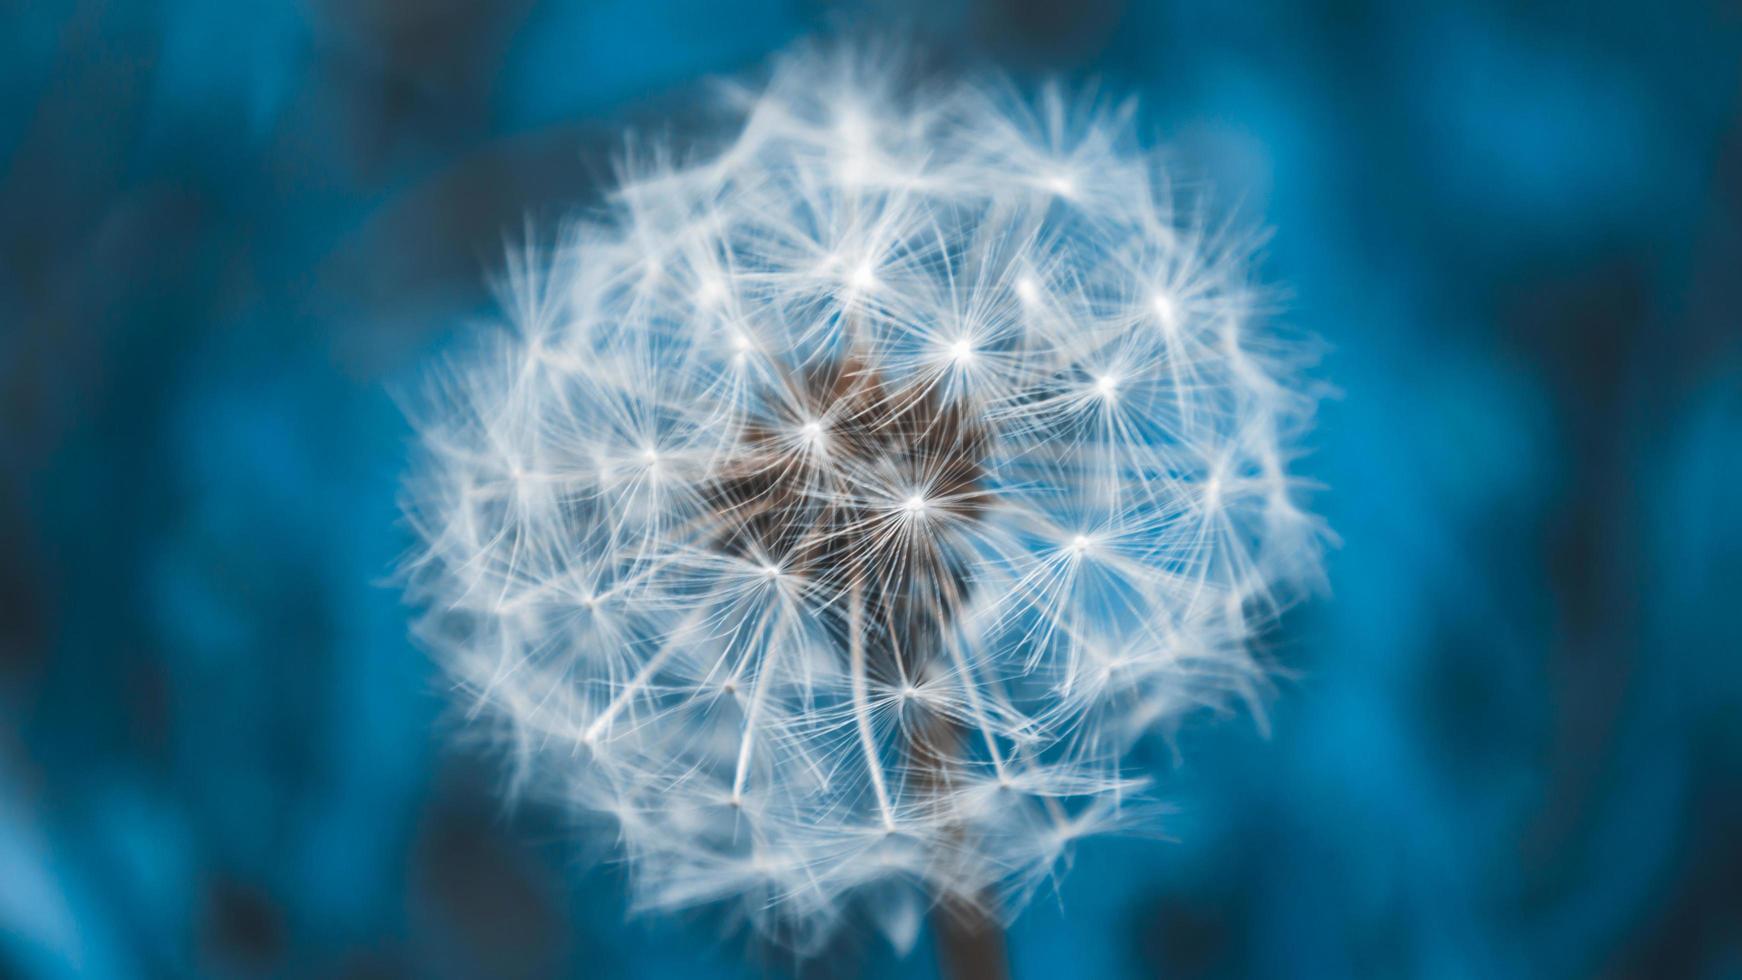 One fluffy white dandelion on blue background with bokeh photo